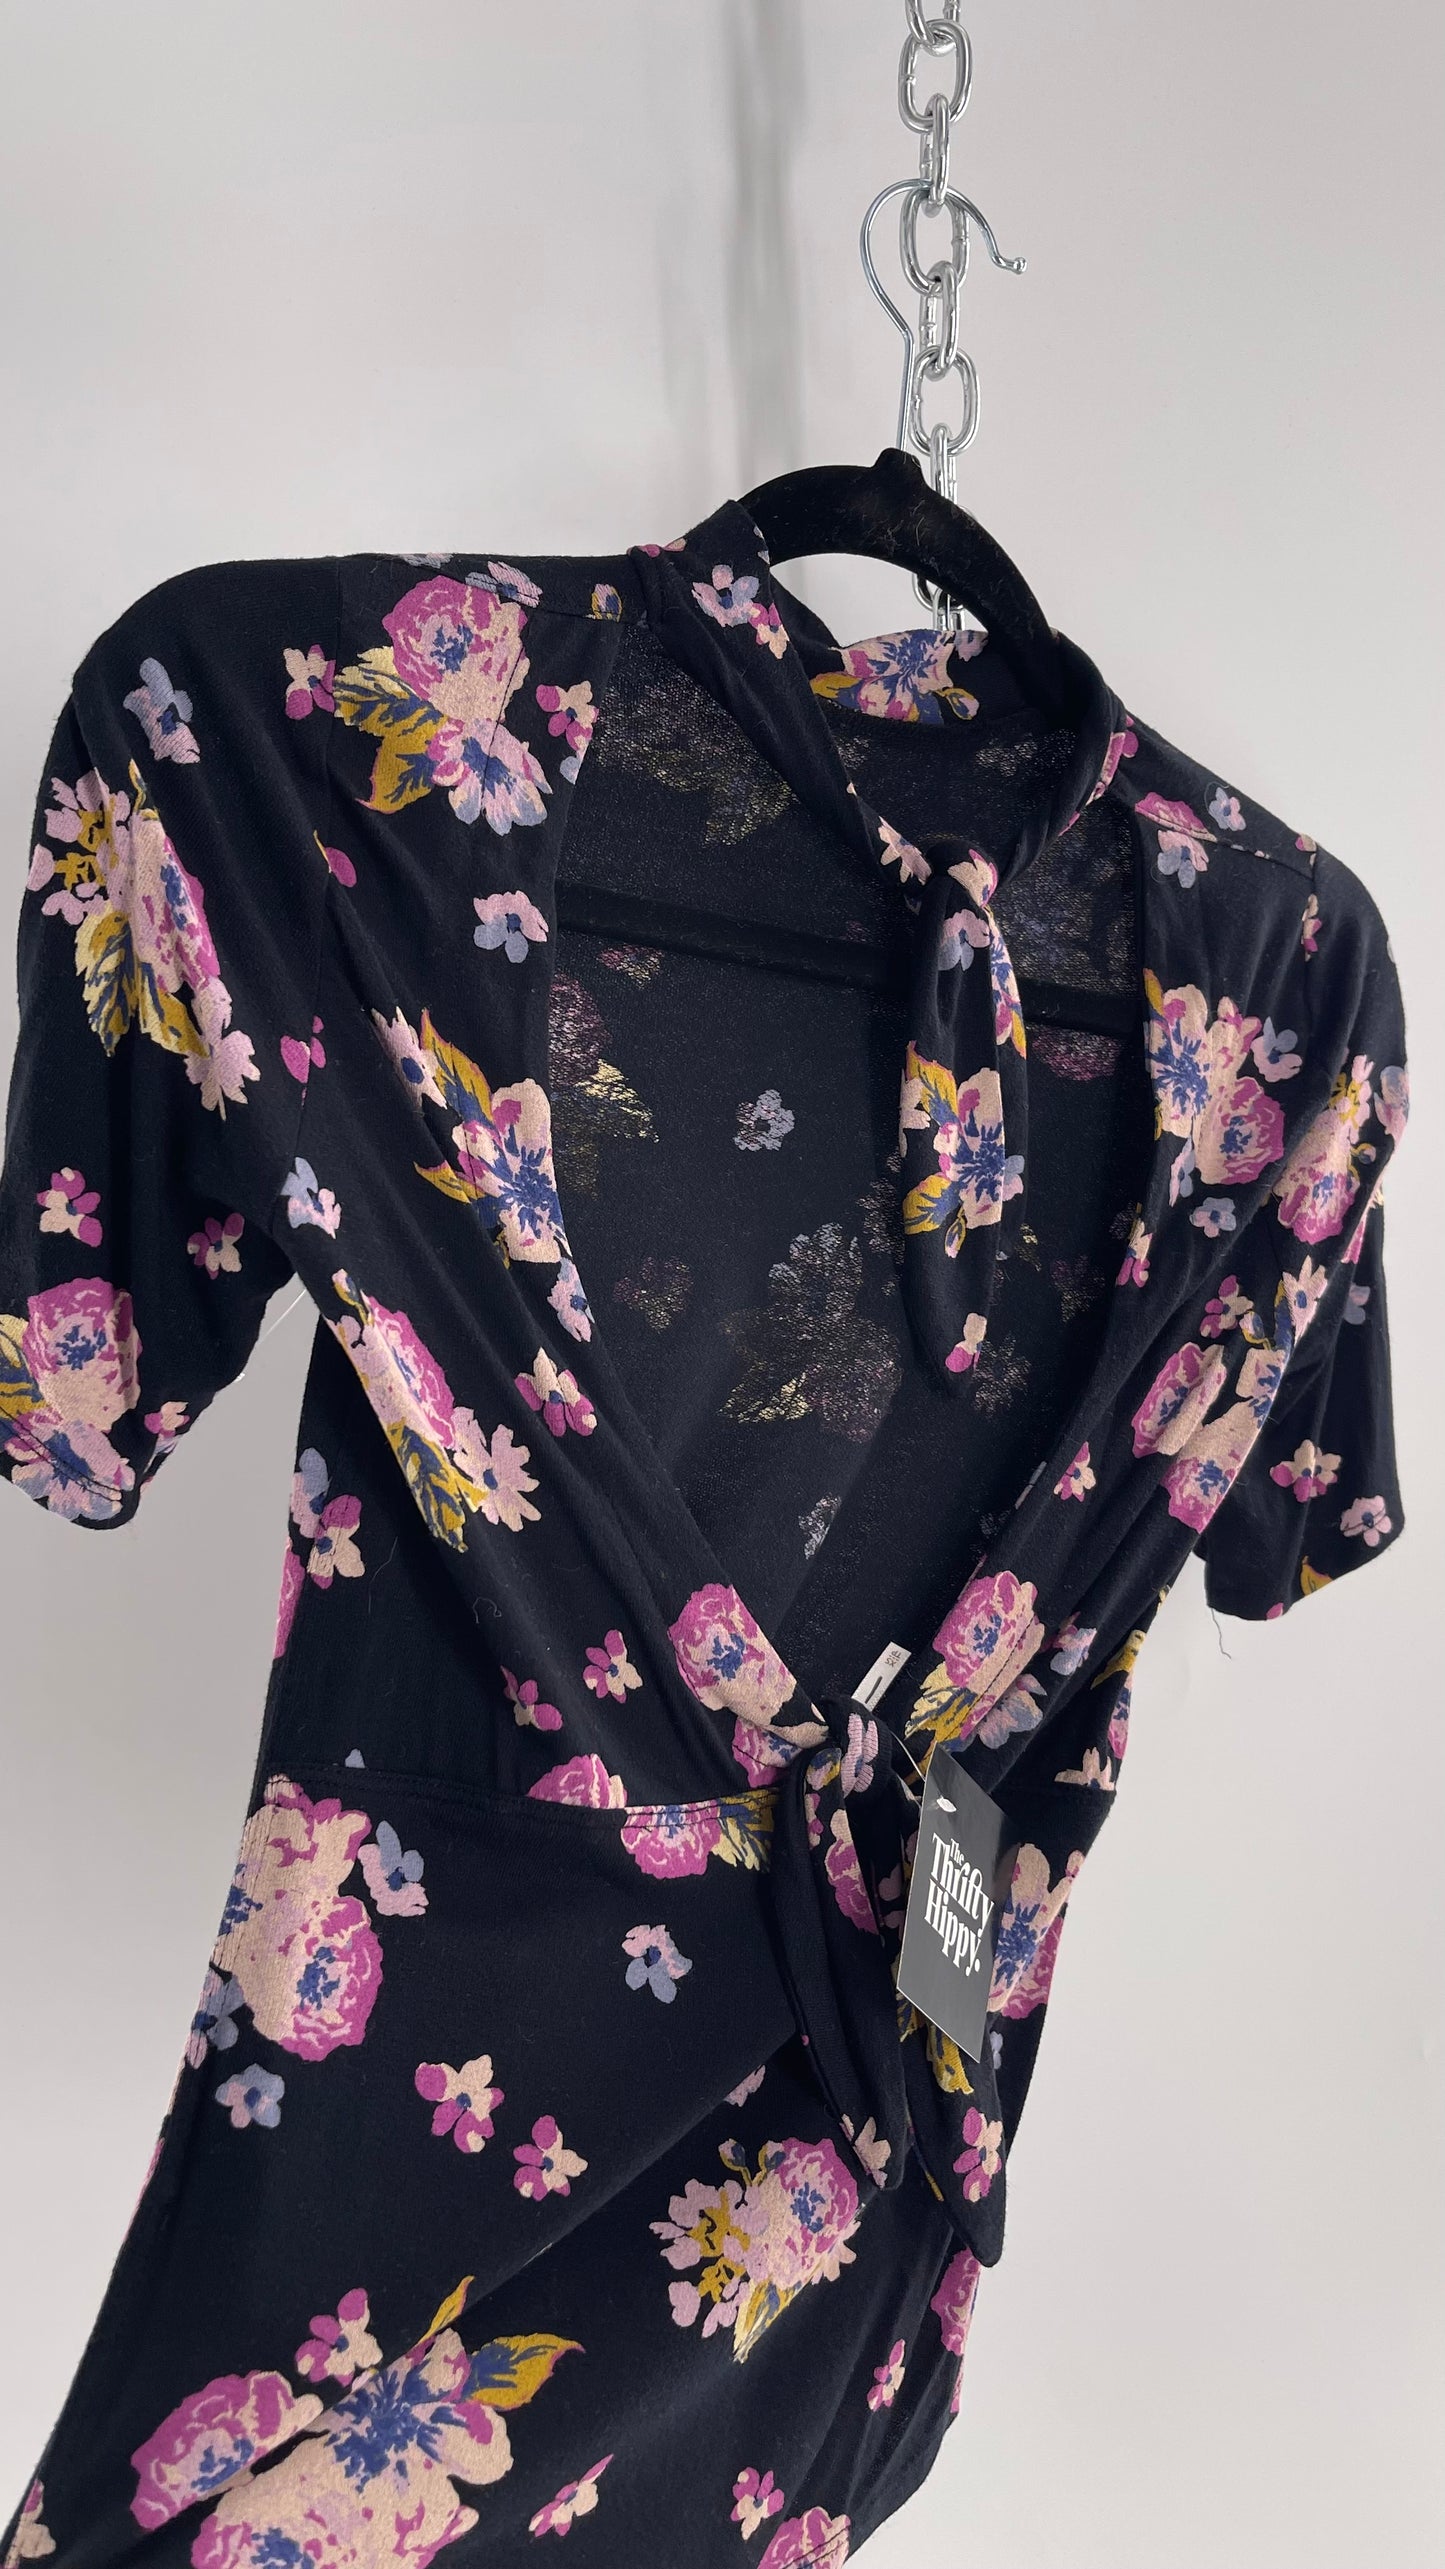 Free People Floral Open Tied Up Back - (Size XS)